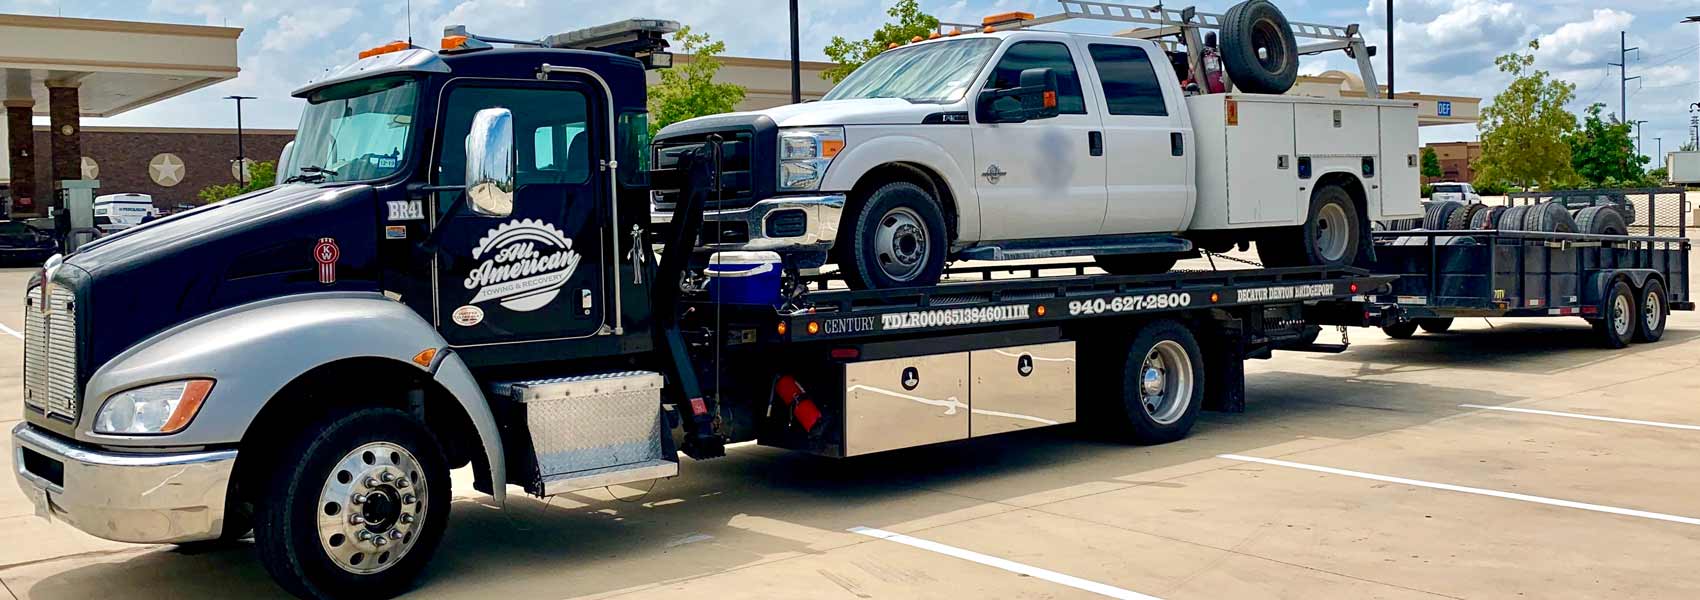 Roadside-Assistance-Denton-County-Texas-All-American-Towing-2